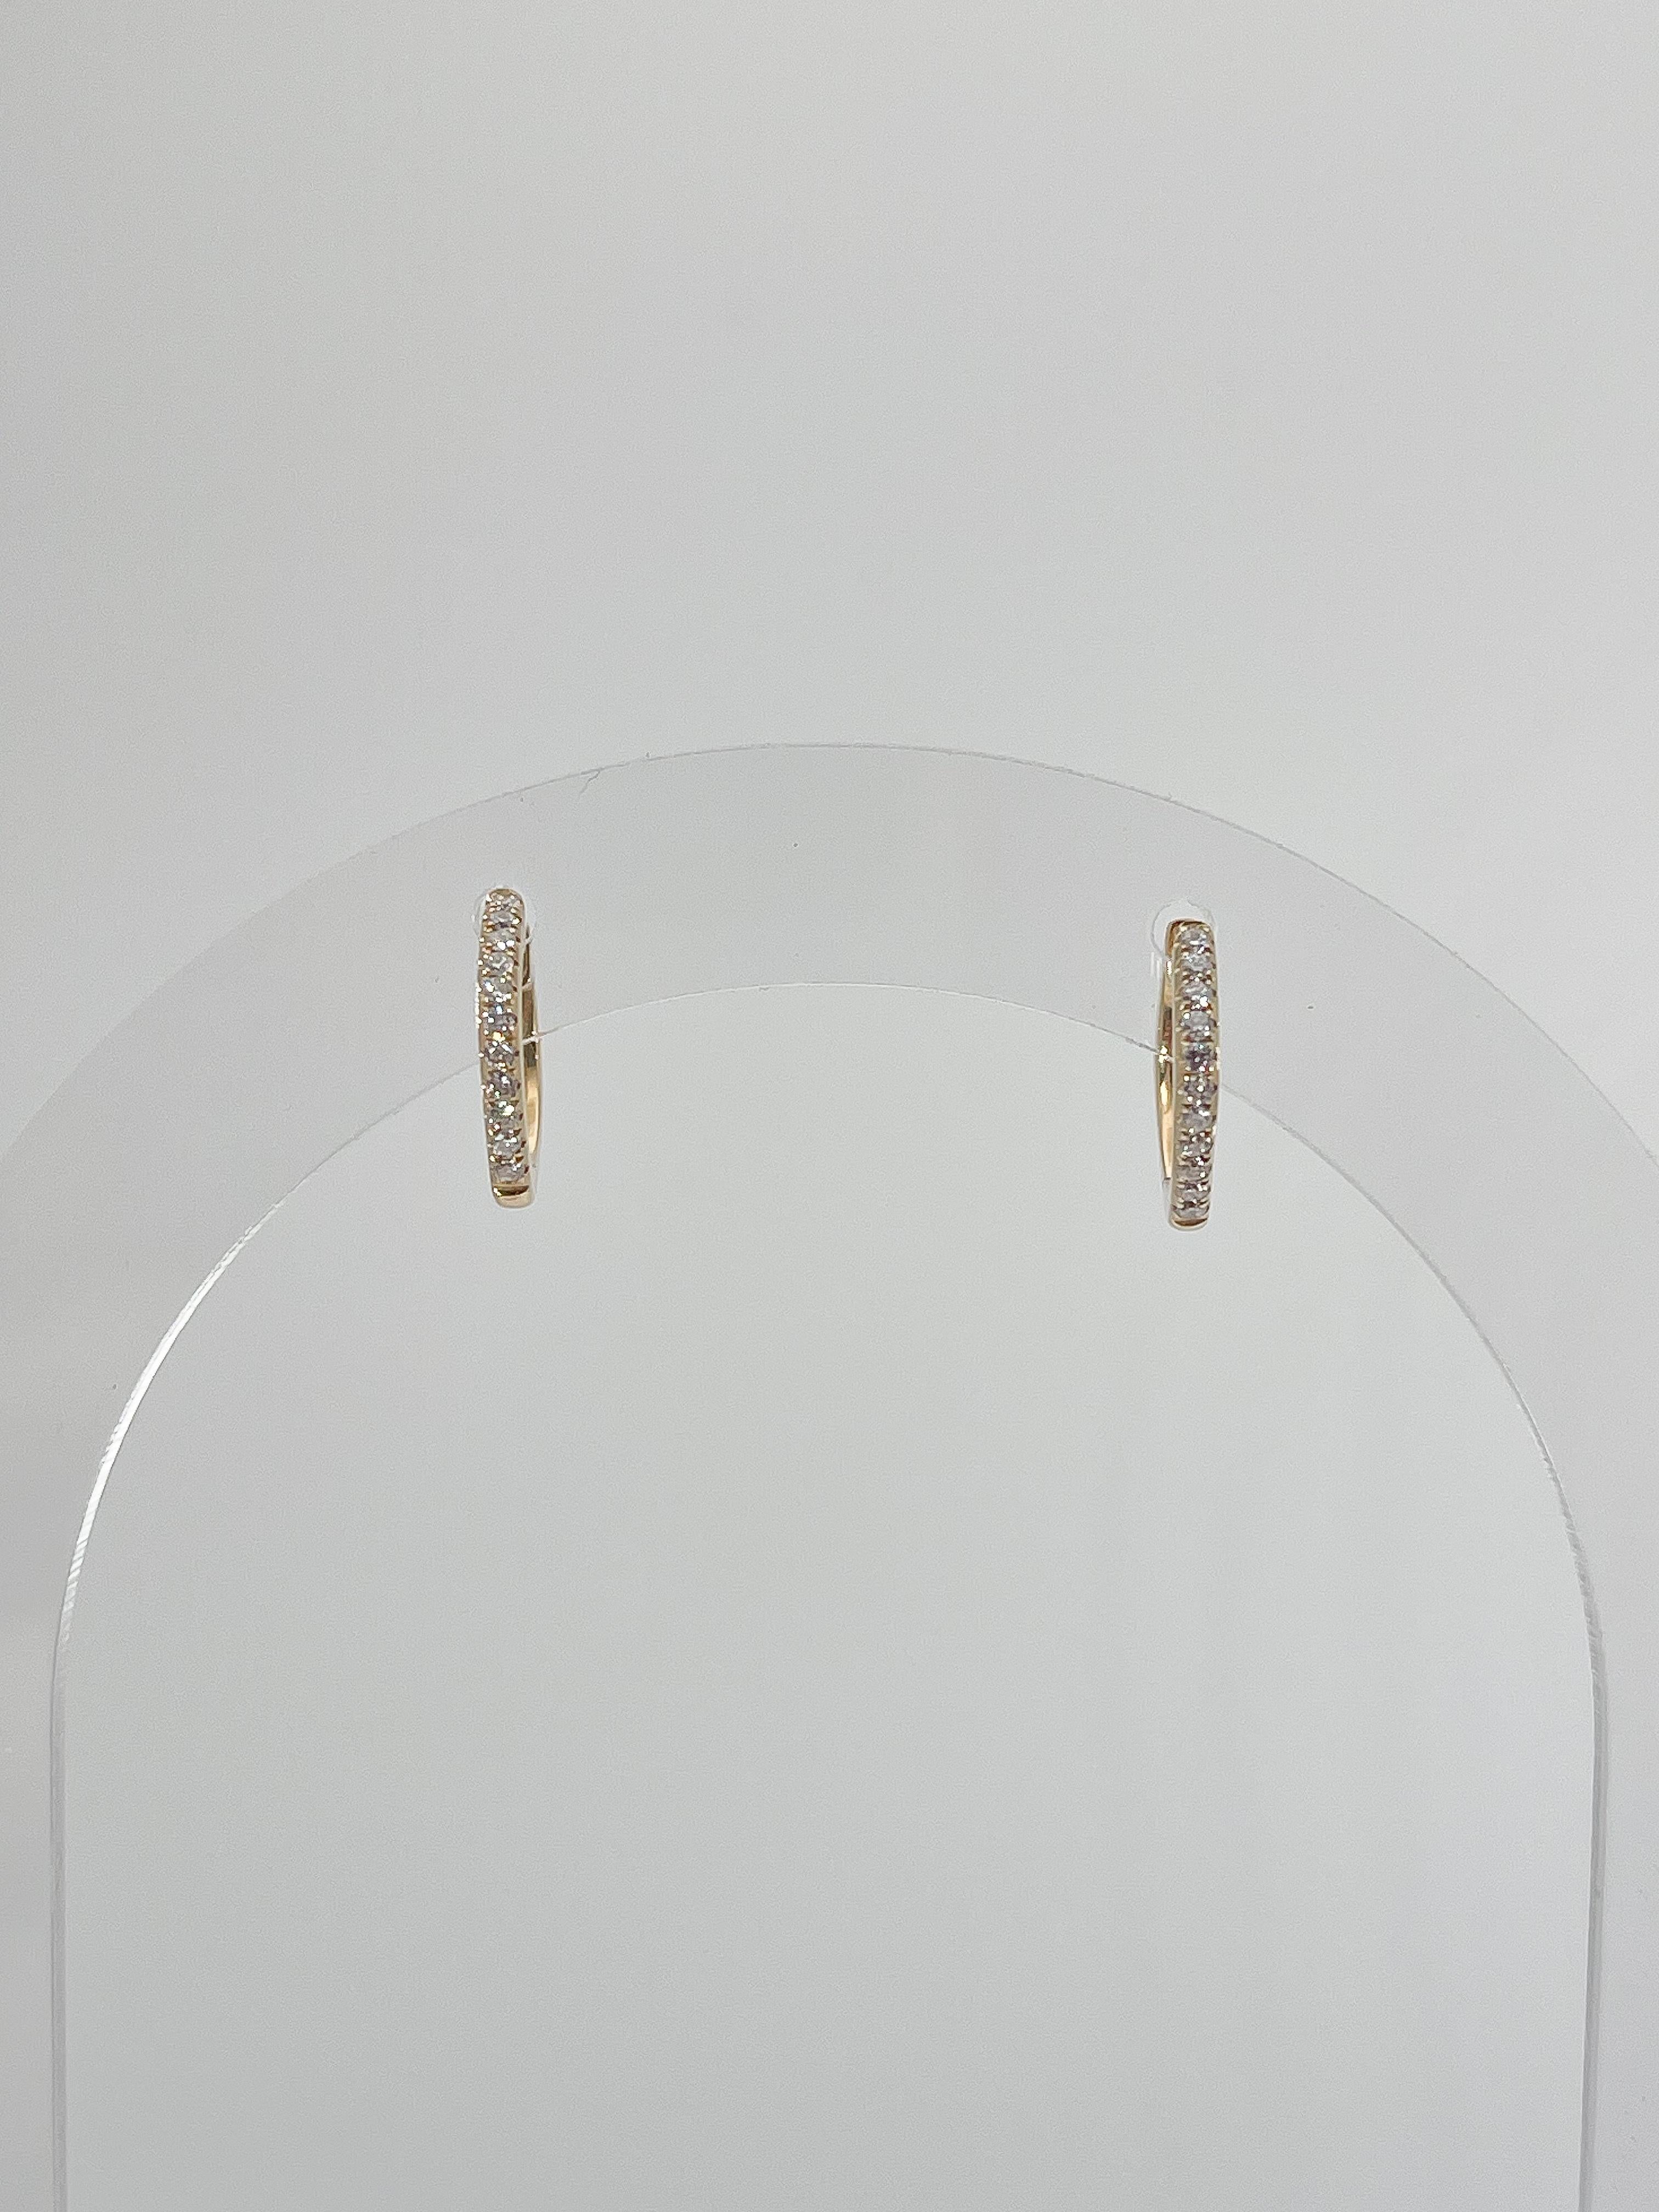 14k yellow gold .17 CTW diamond squared hoop earrings. The hoops are hinged for easy opening and wearing. The hoops measure 11.5 x 11.5 and they have a total weight of 1.6 grams. 